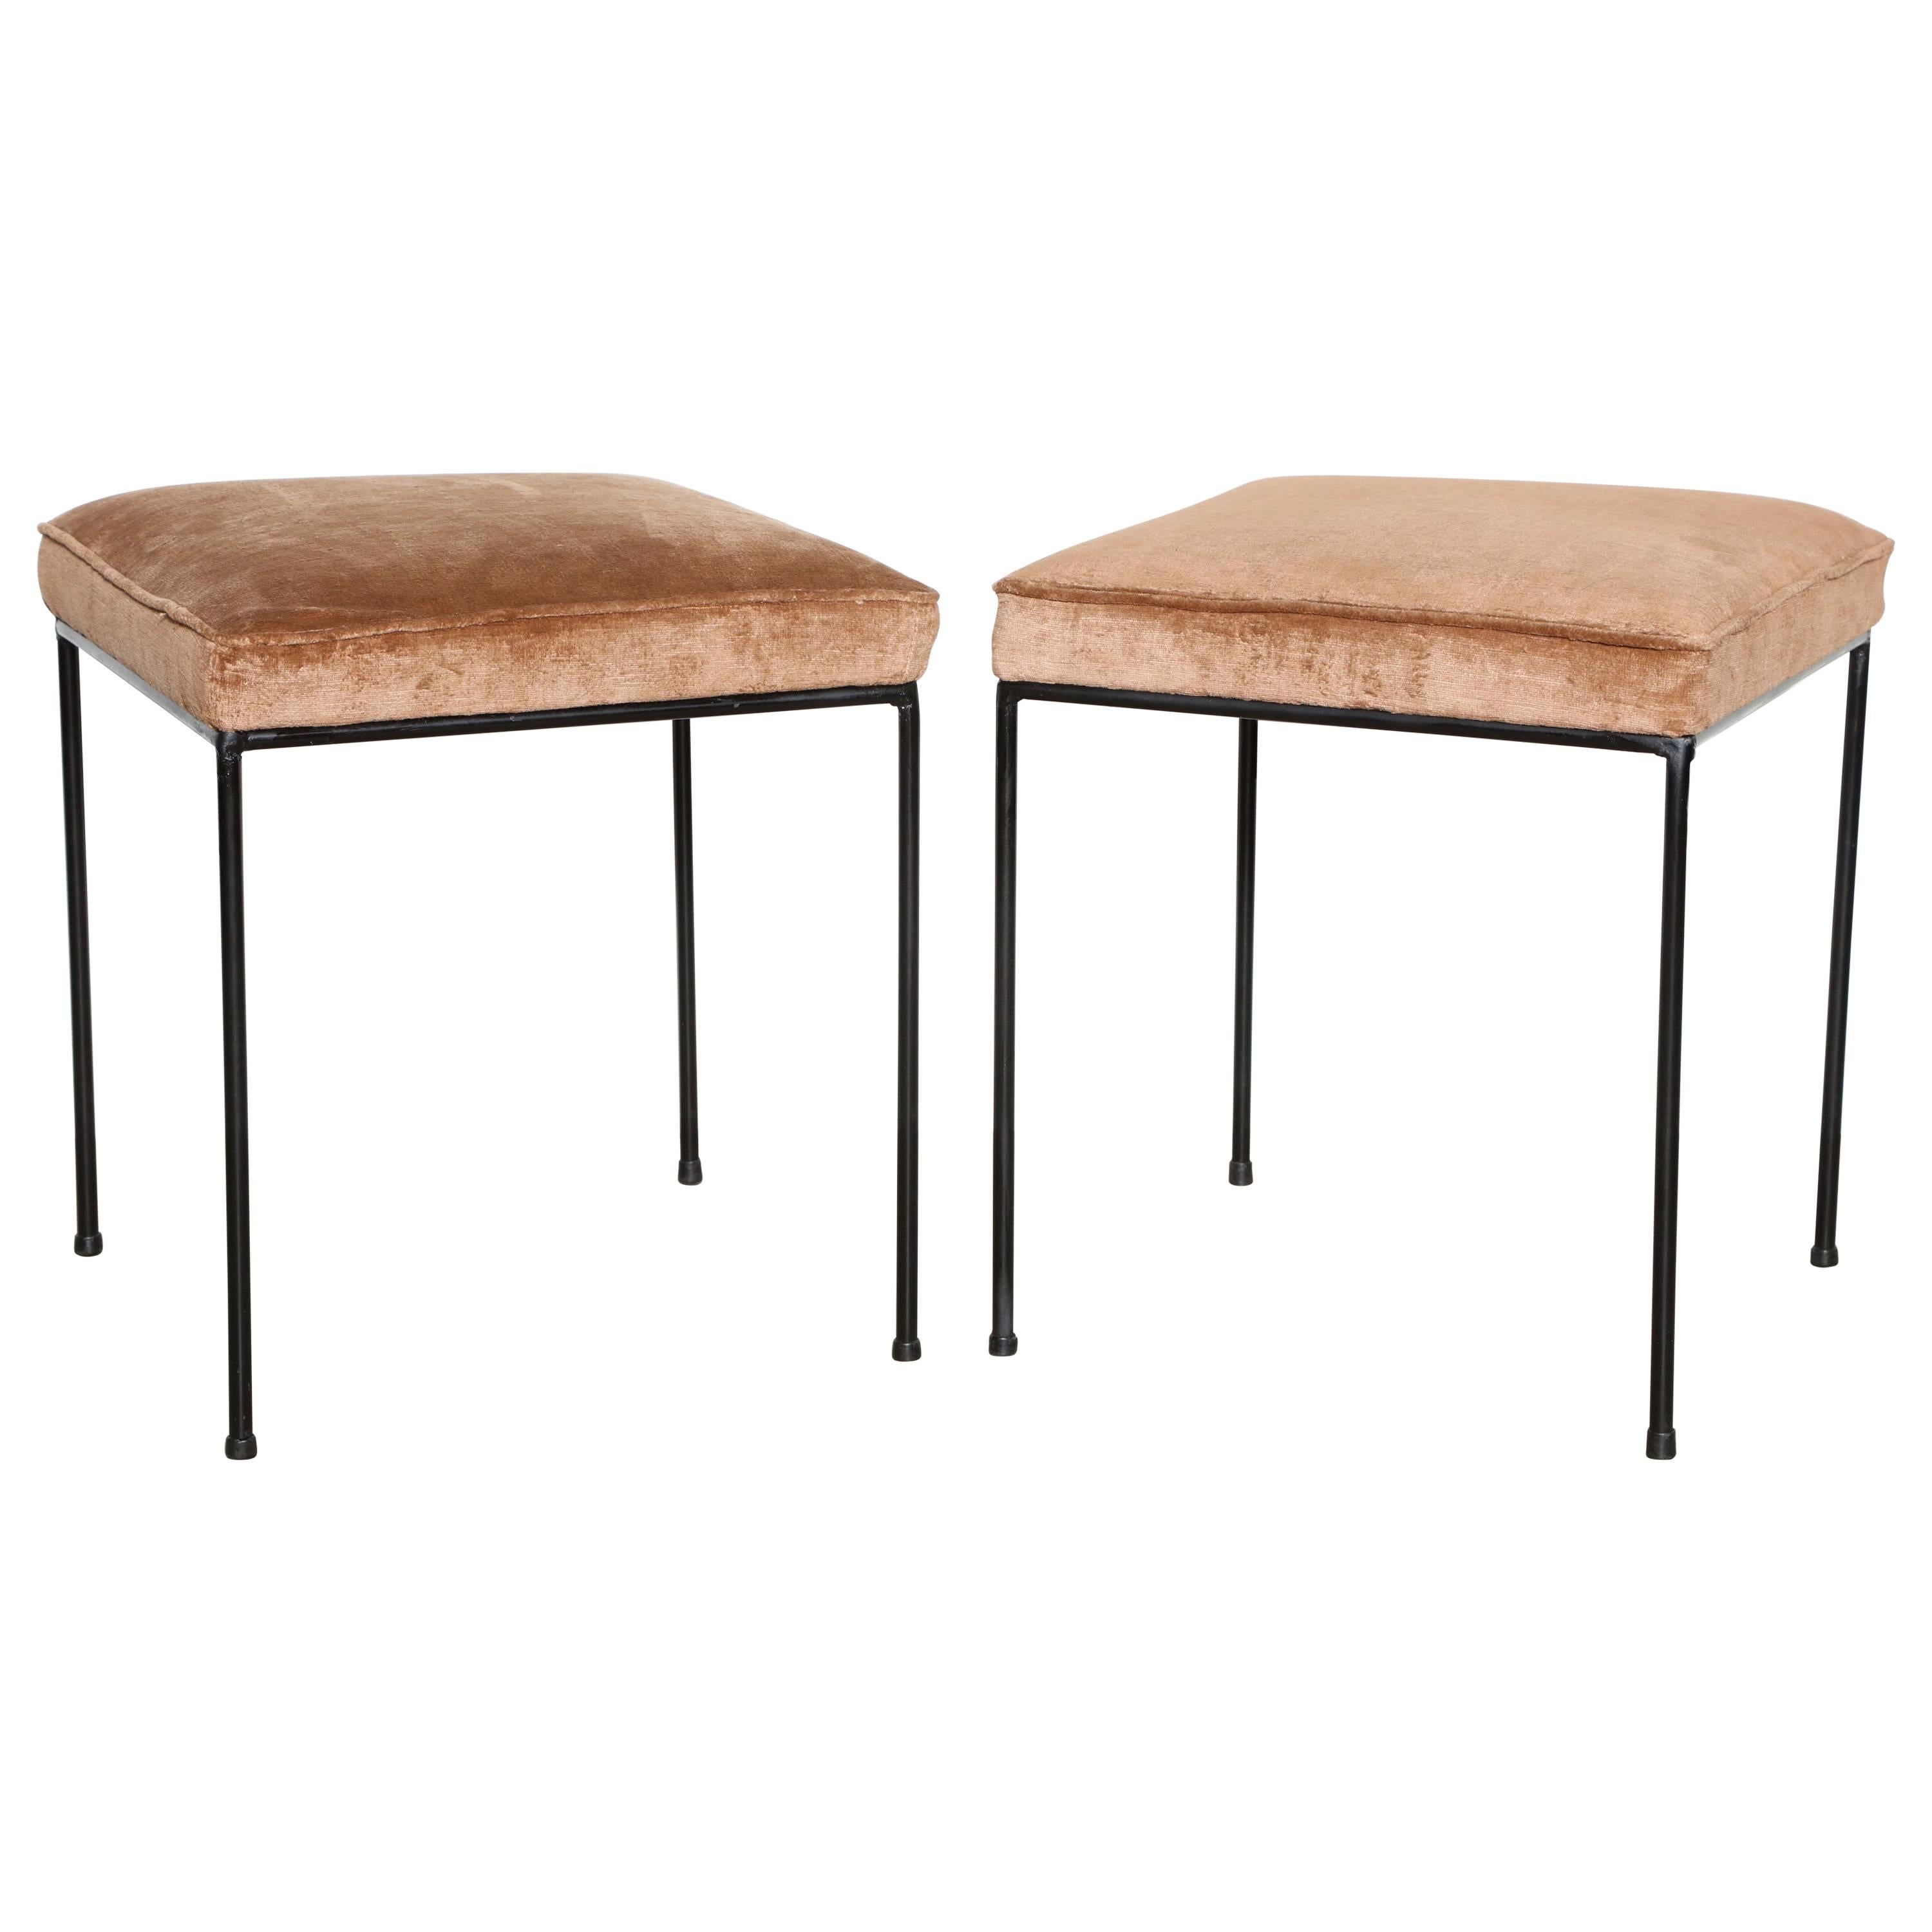 Pair of 1950s Frederick Weinberg Wrought Iron and Cashmere Stools